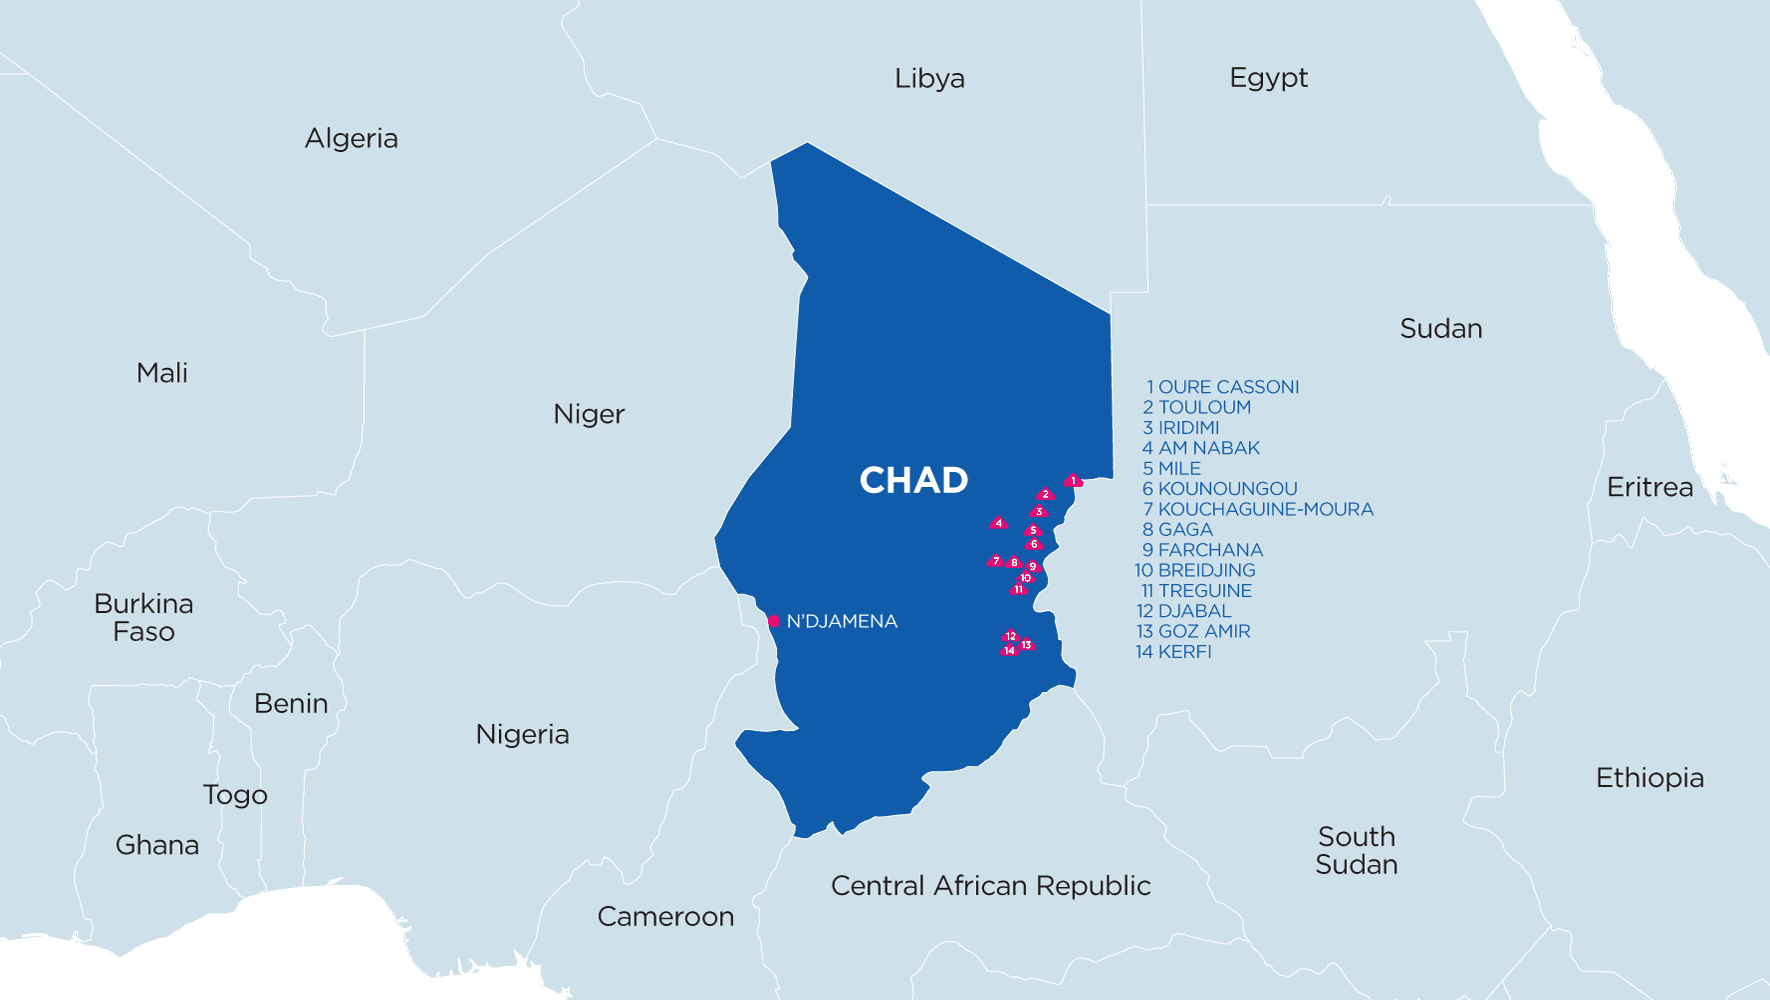 A map showing HIAS' operations in Chad. Locations marked with triangles are field offices serving 13 refugee camps along the country's eastern border with Sudan. They are Oure Cassoni, Touloum, Iridimi, Am Nabak, Mile, Kounoungou. Kouchaguine-Moura, Gaga, Farchana, Breidjing, Treguine, Djabal, Goz Amir, and Kerfi. | Sudan's Crisis Casts Spotlight on Neighboring Chad | HIAS.org